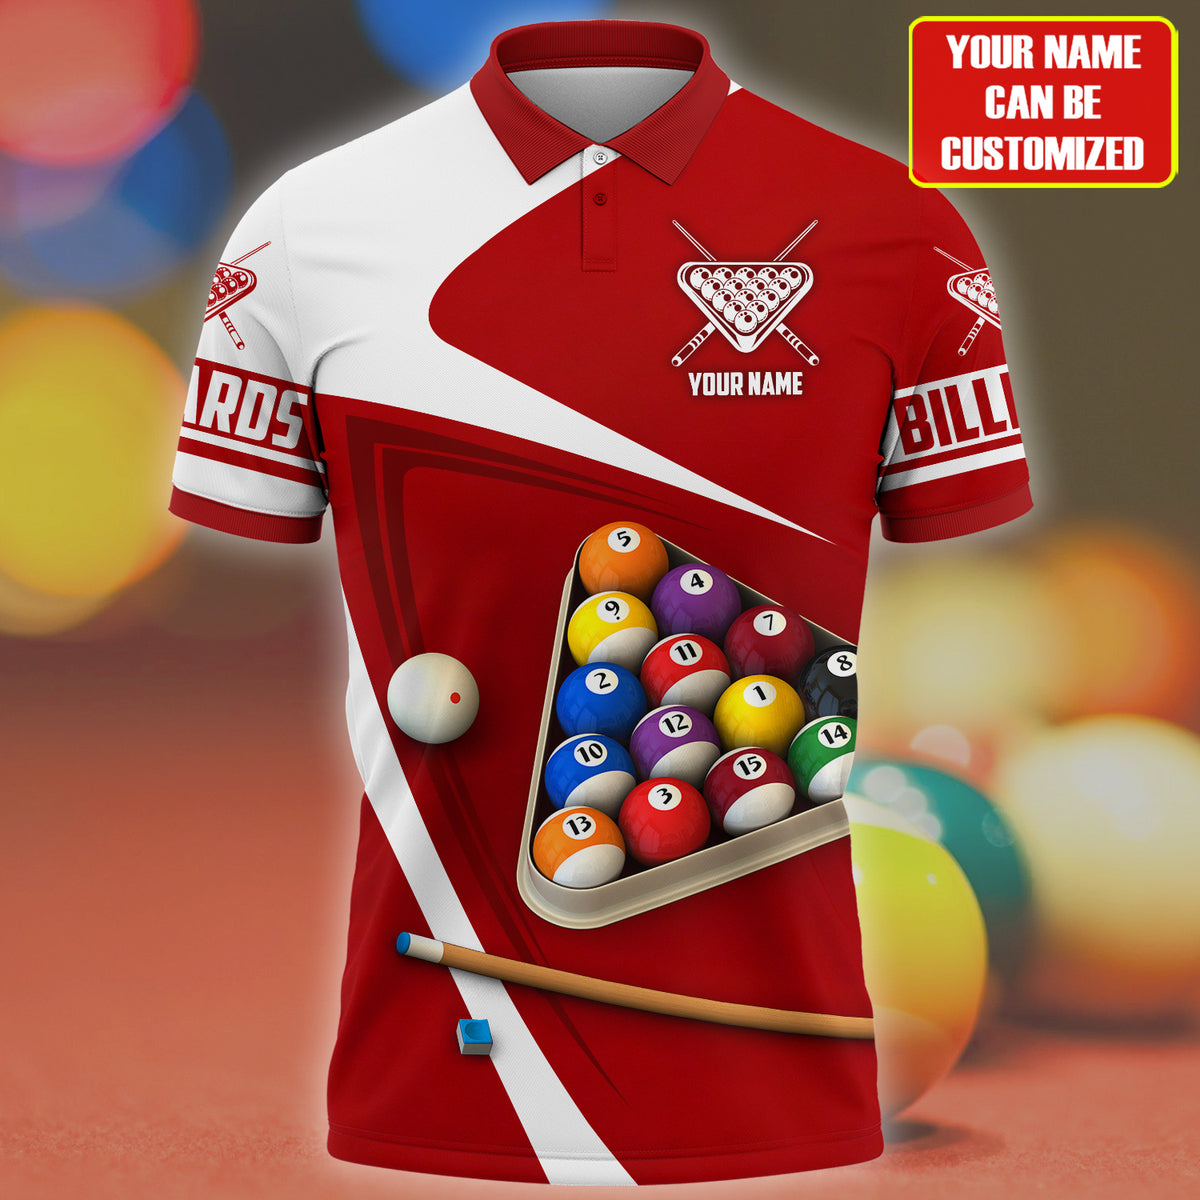 Personalized Name Billiard Player All Over Printed Unisex Polo Shirt/ Red Billiard Uniform Shirt